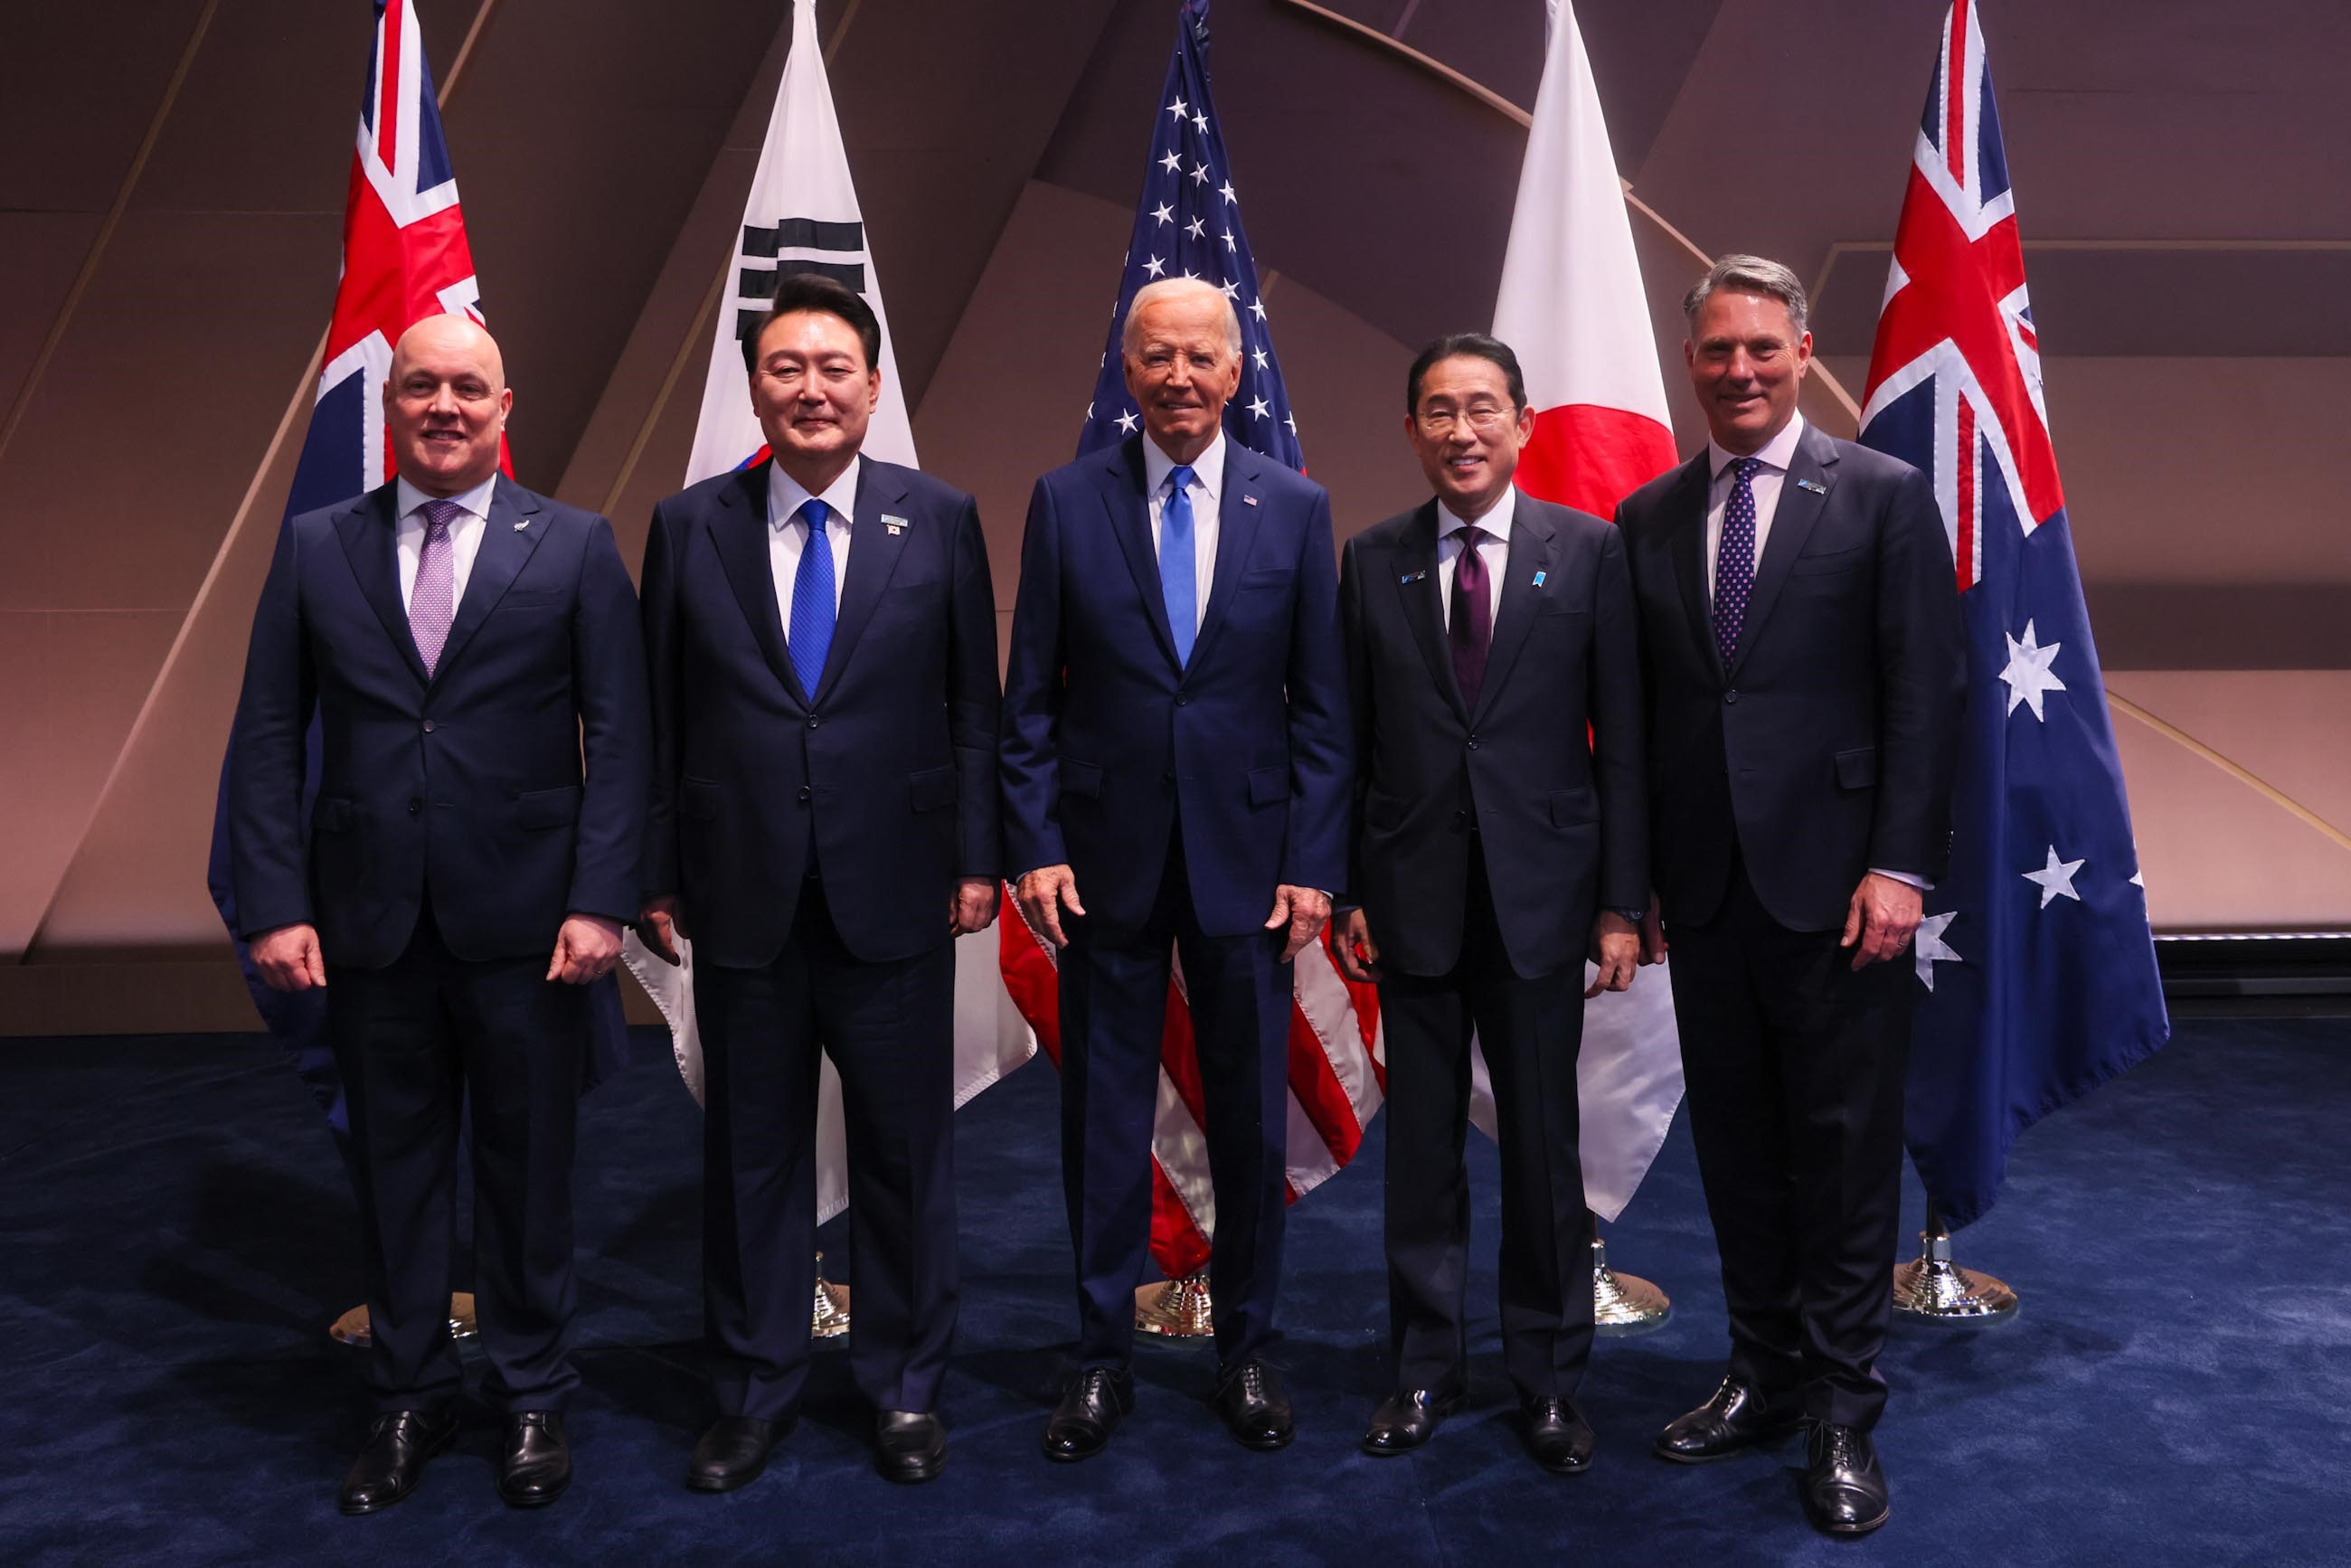 Group photo with IP4 leaders and US President Biden (2)